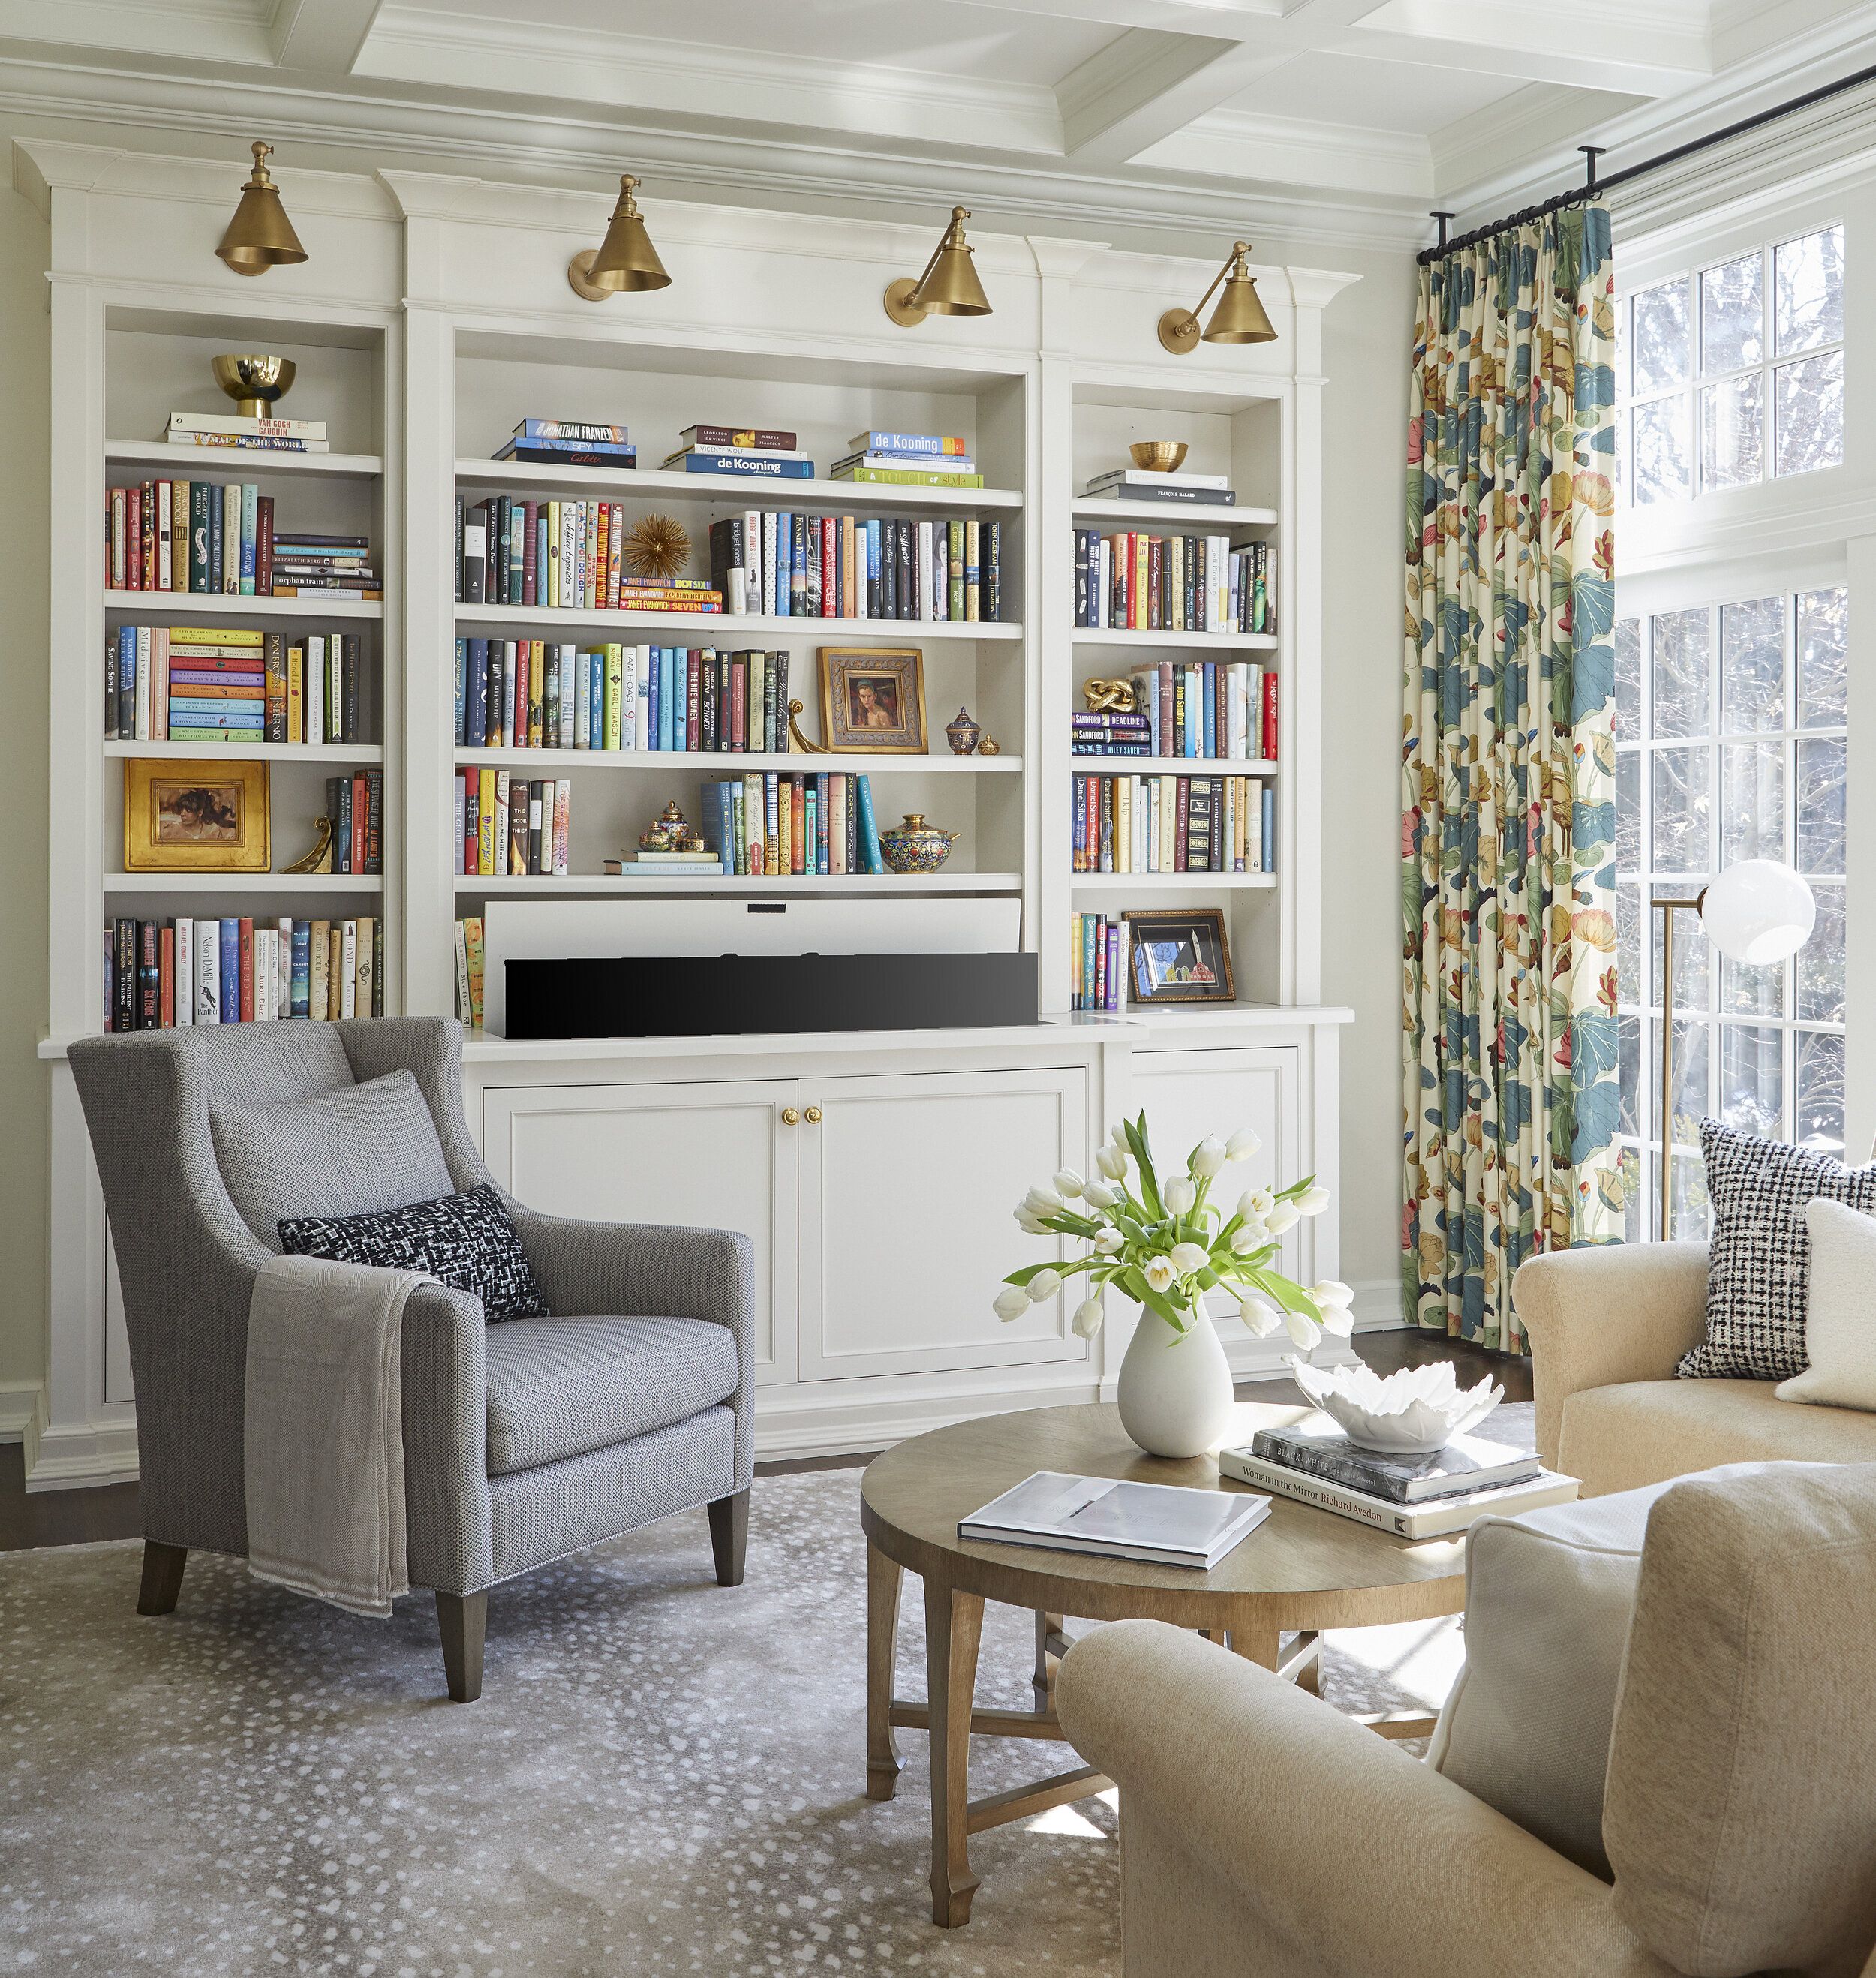 How To Organize Your Bookshelves, How To Organize Shelves In Living Room